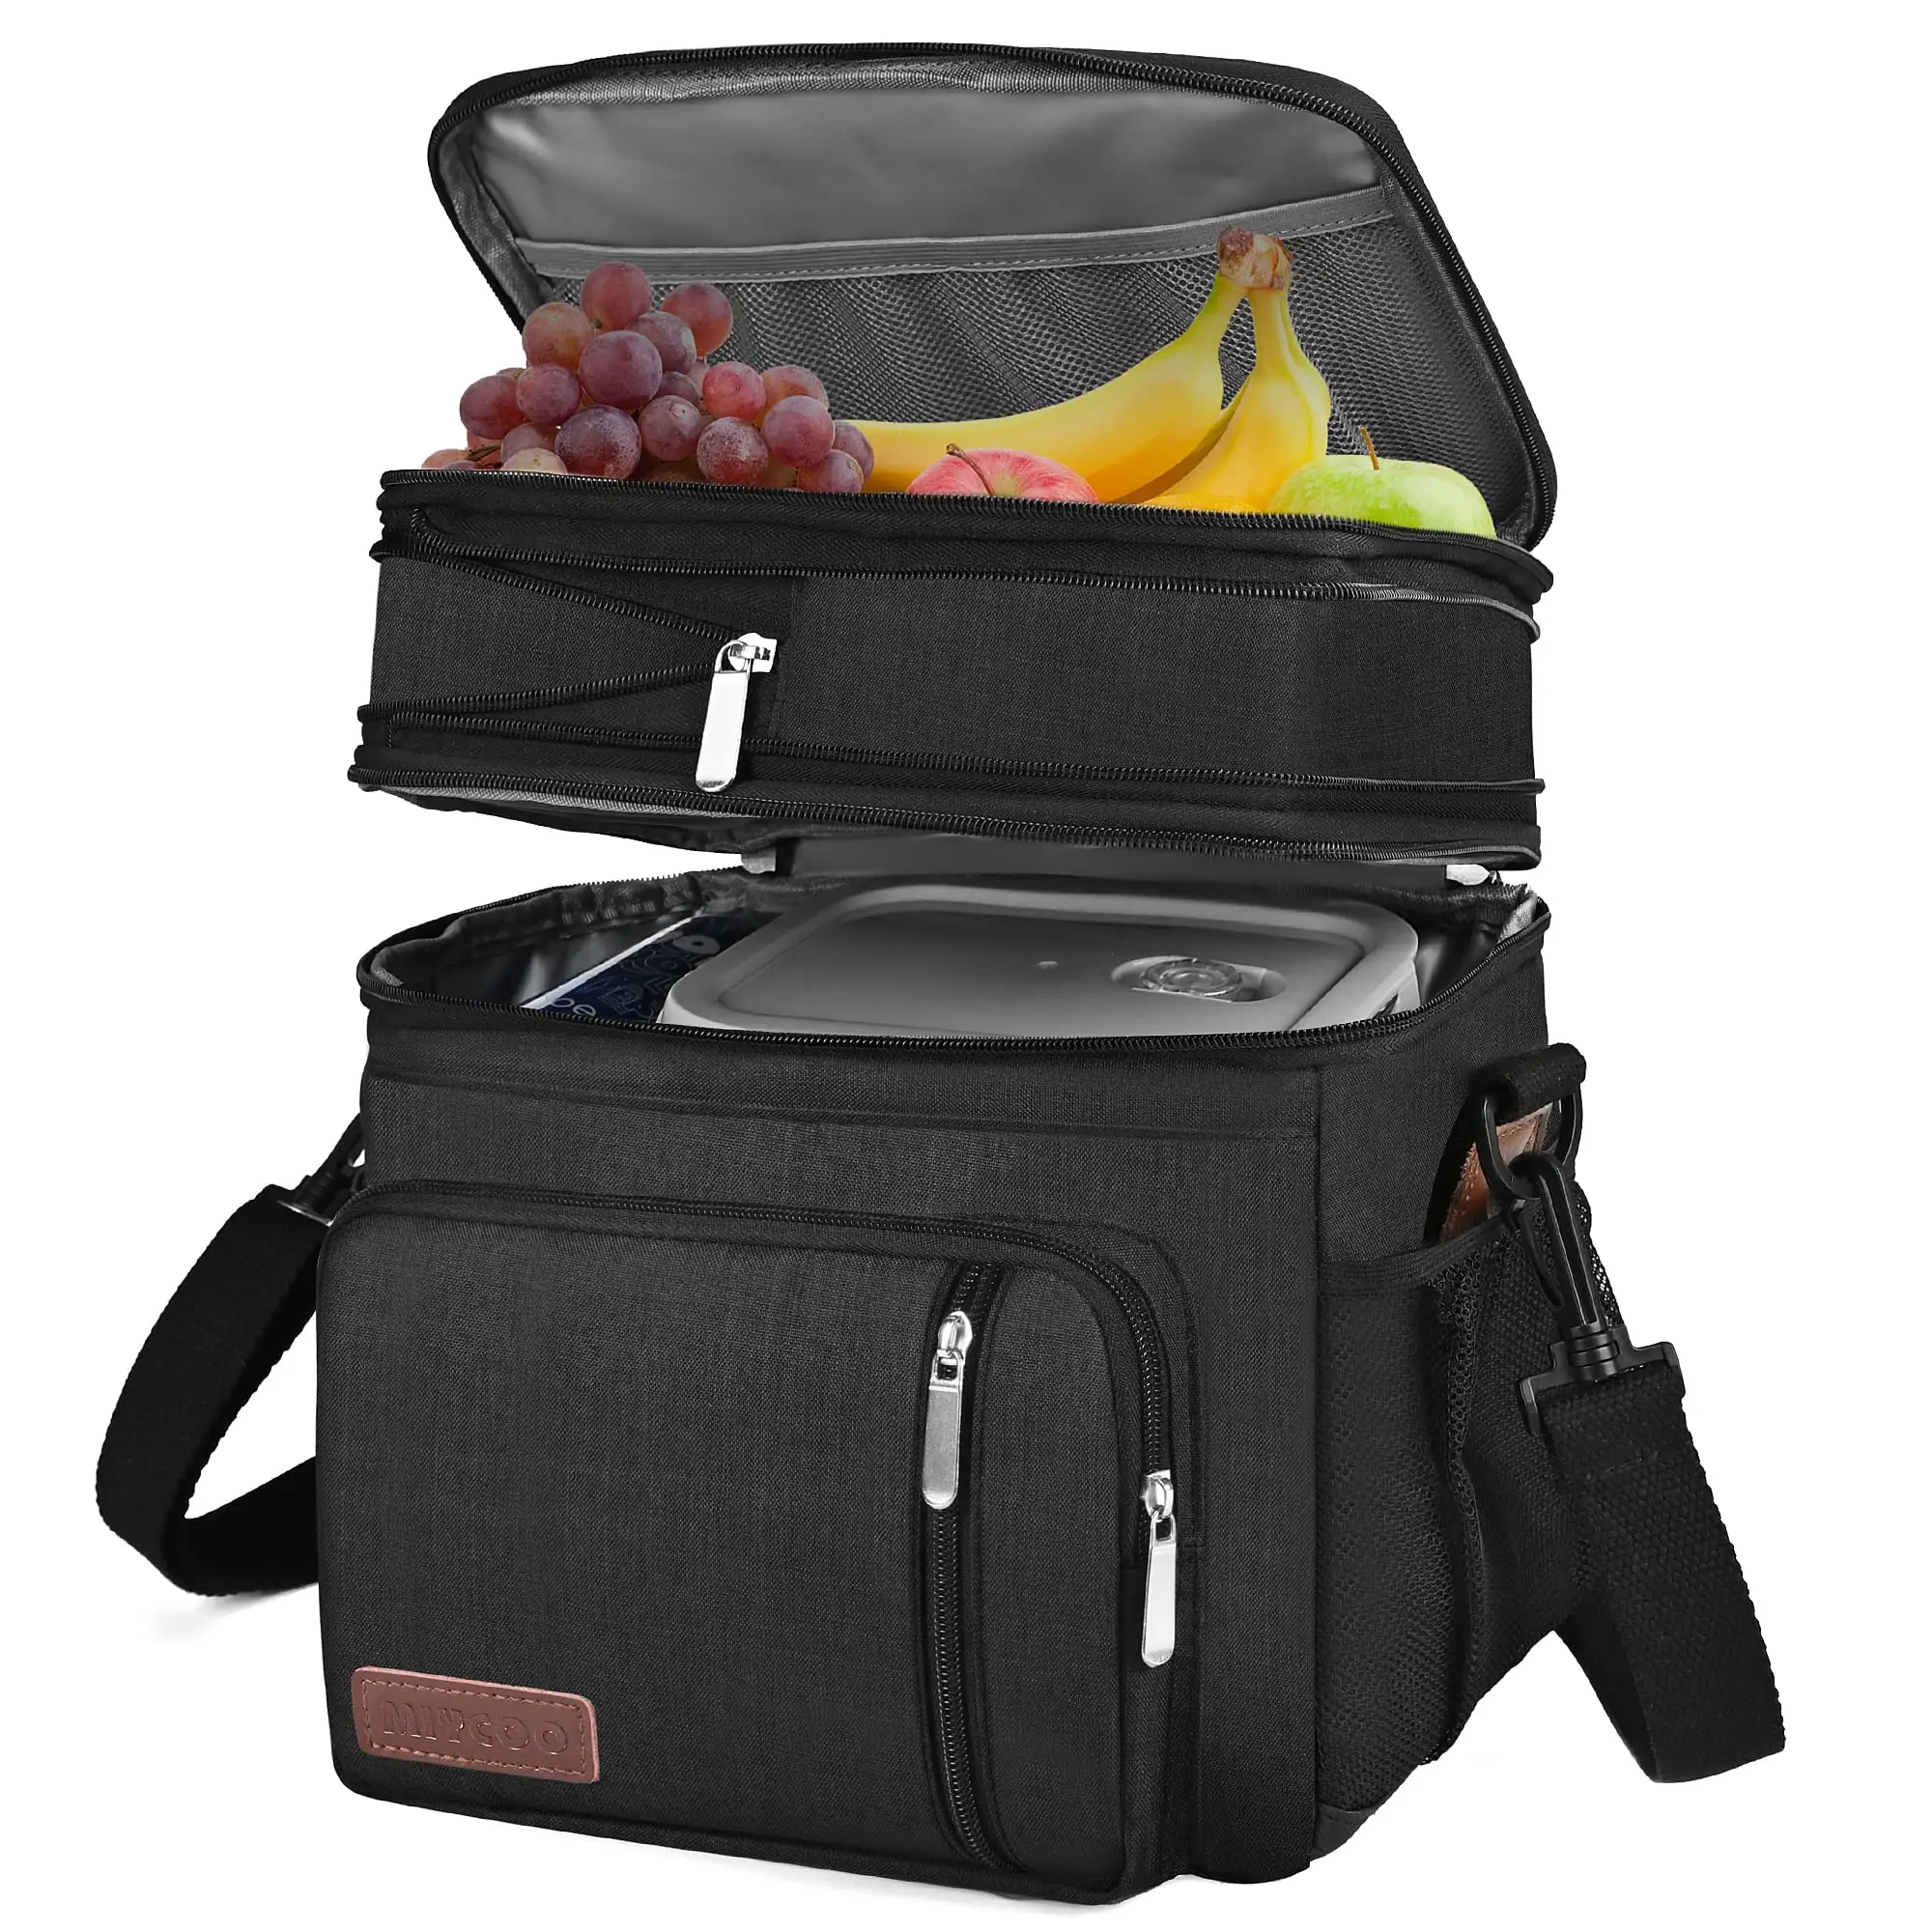 Lunch Bag for Women Men Double Deck Lunch Box - Leakproof Insulated Soft Large Lunch Cooler Bag